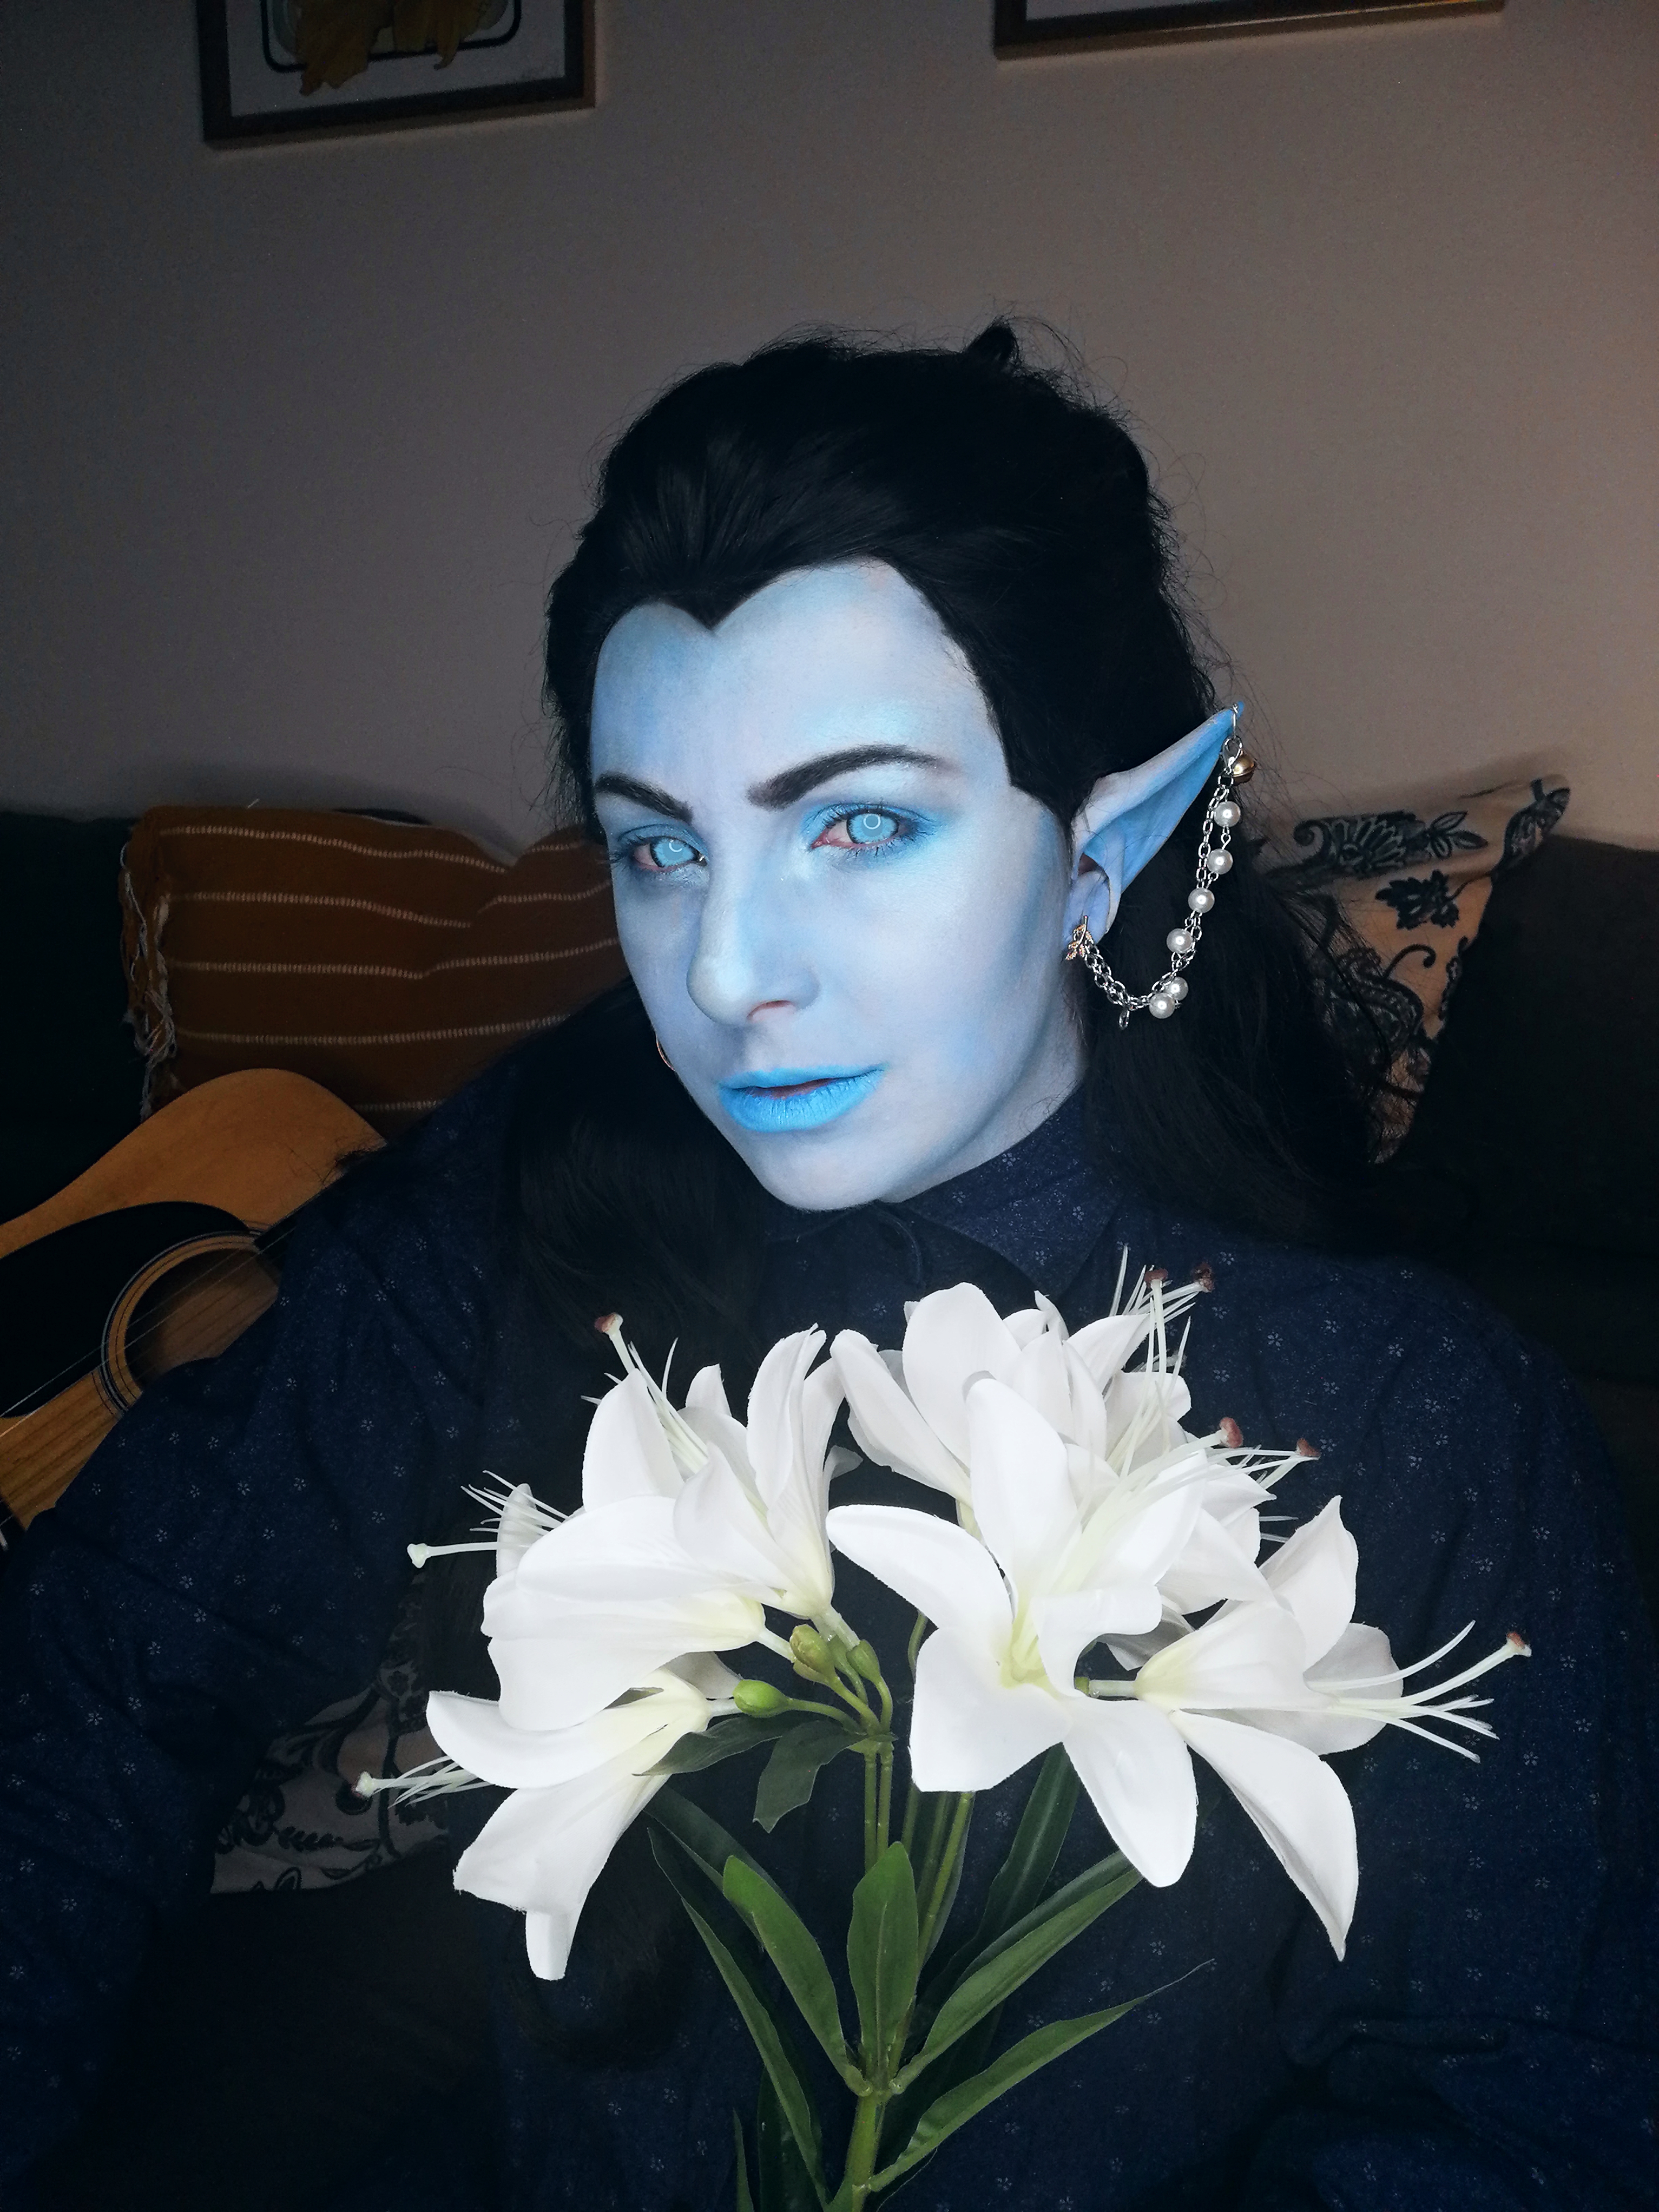 It's (not) so hard to be blue aneb bodypaint v cosplayi